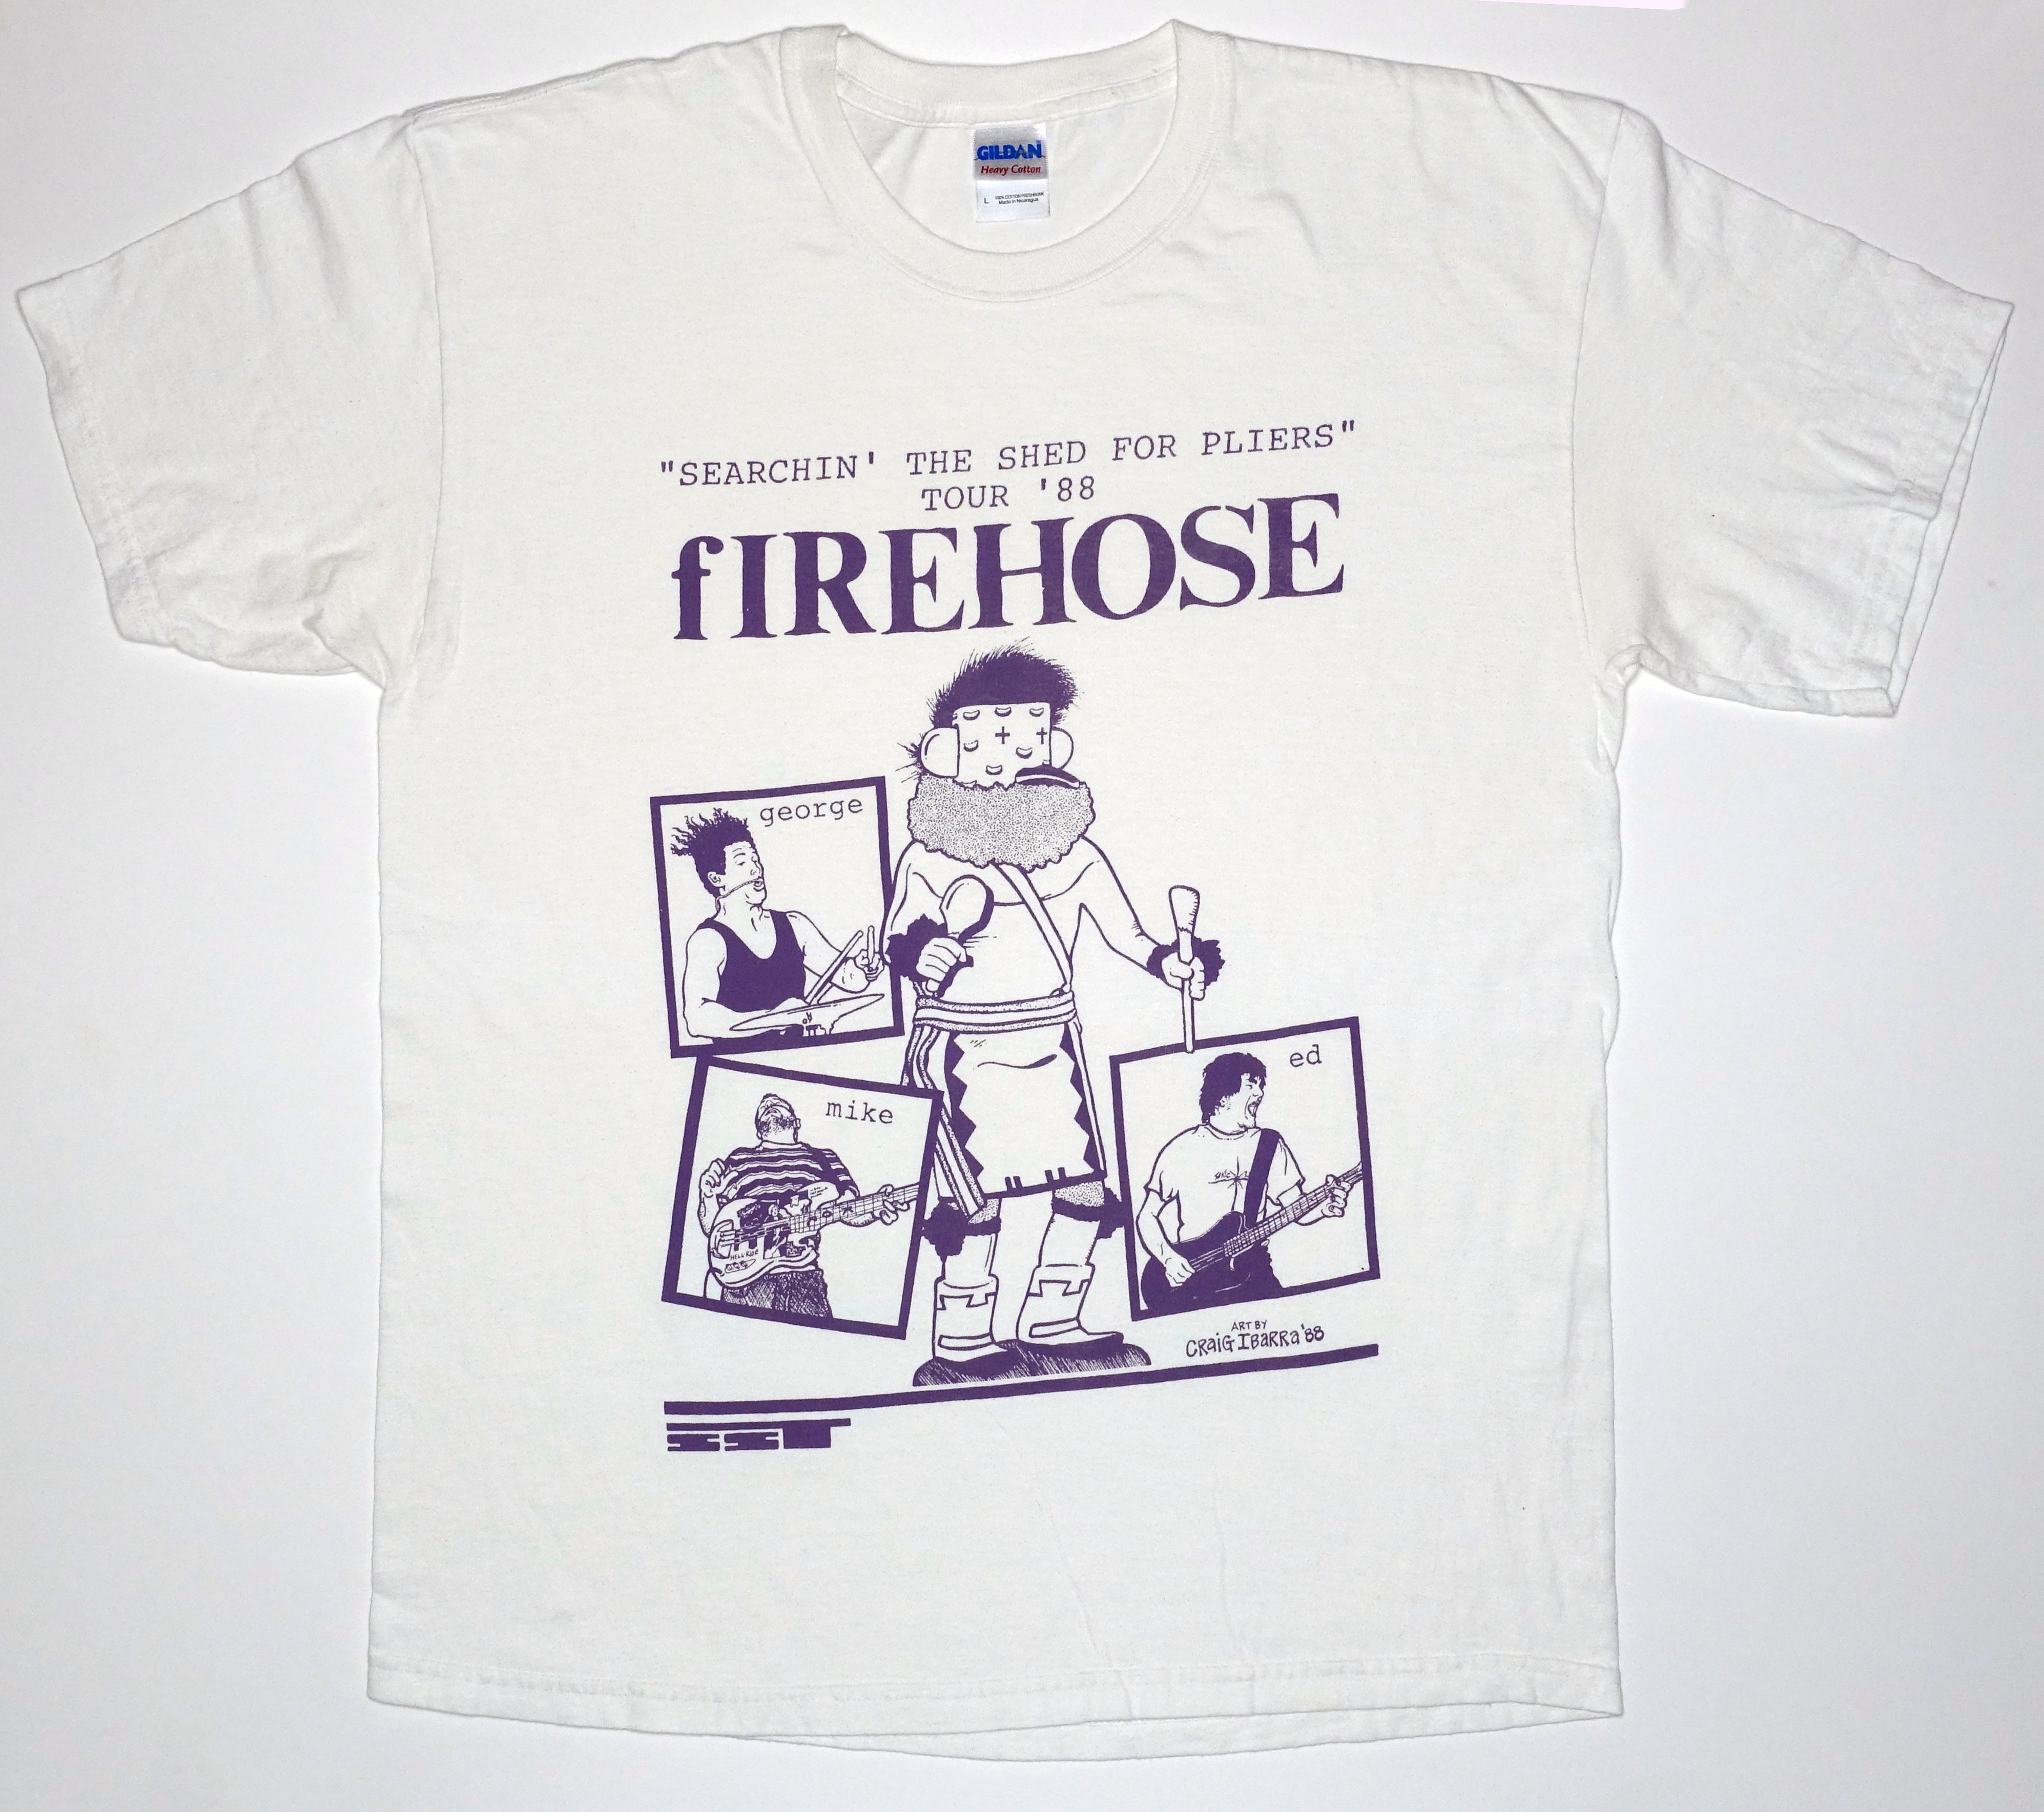 fIREHOSE - Searchin' The Shed For Pliers 1988 Tour Shirt Size Large (Bootleg By Me)